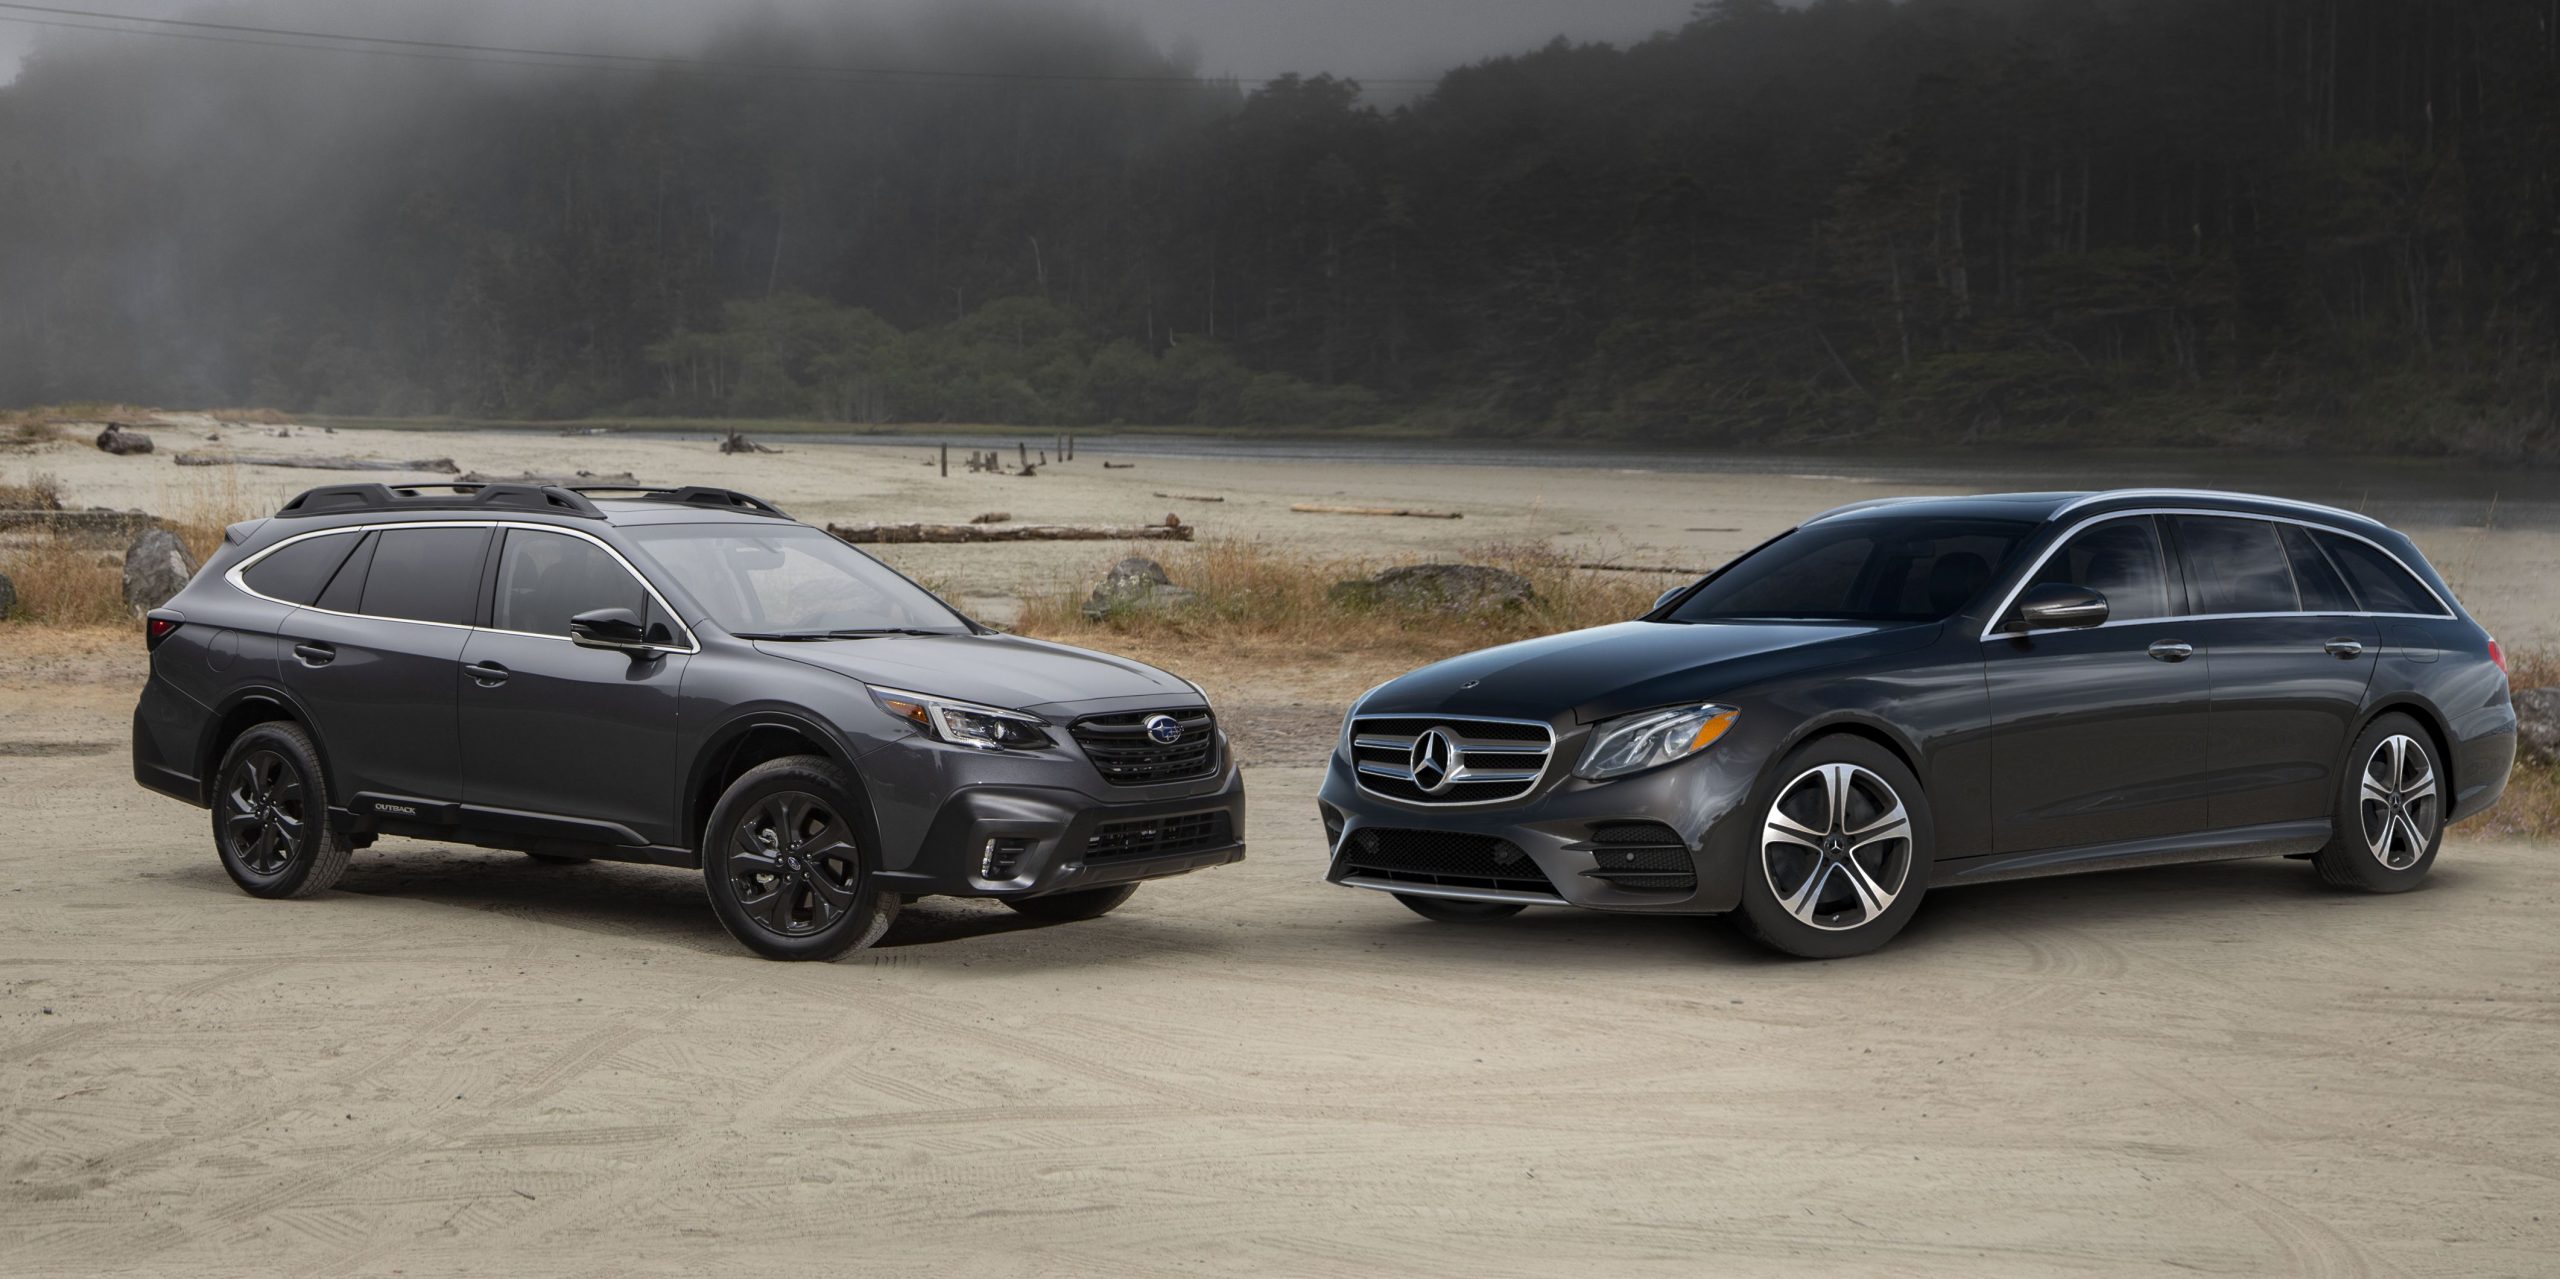 Station Wagons Sell in U.S. Mainly When They’re Disguised as SUVs